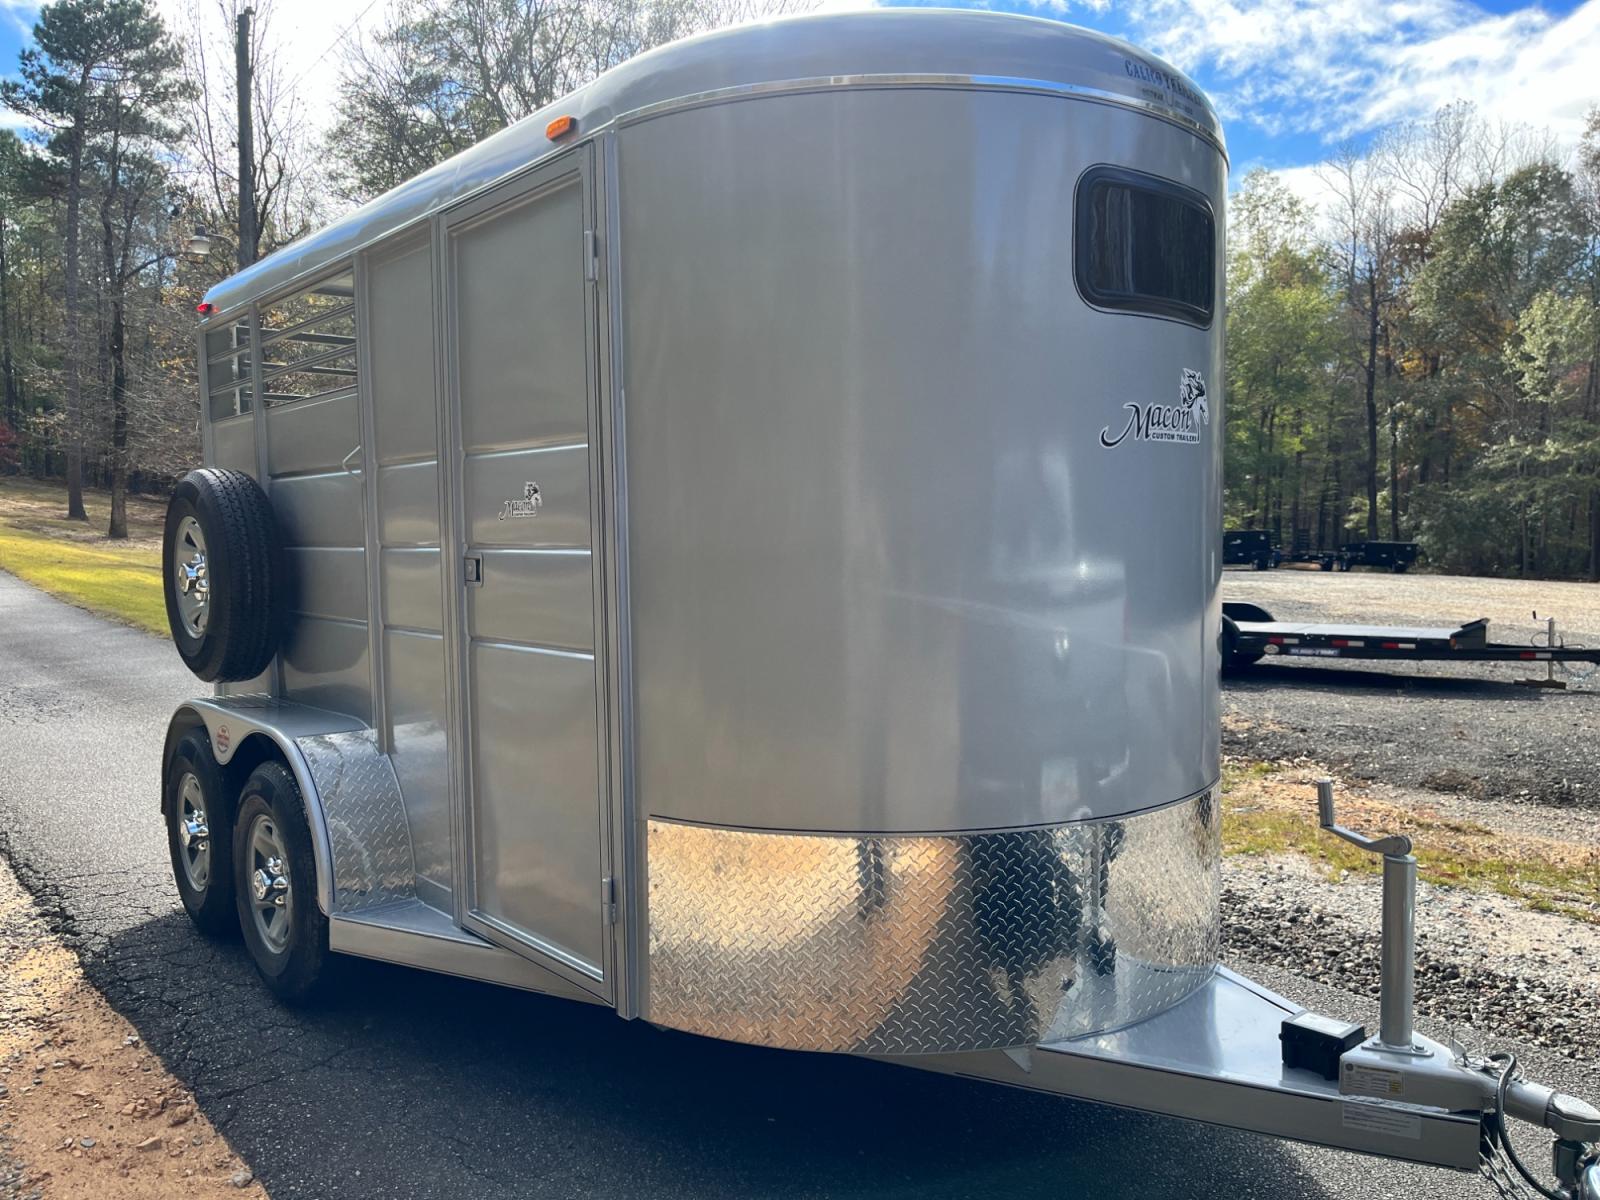 2023 Silver Metallic Calico 2 Horse Slant , located at 1330 Rainey Rd., Macon, 31220, (478) 960-1044, 32.845638, -83.778687 - Brand New 2023 Model 2 Horse Slant Calico Brand Trailer! 6ft Wide X 13ft Long Deluxe Model Tandem Axle Trailer! Easy Close Slant Divider Latch! 16" Radials! Beautiful Silver Metallic Paint is Awesome! Black Pin Striping Looks Fantastic! Fully Caulked Inside and Out to Prevent Rust! The Paint i - Photo #7